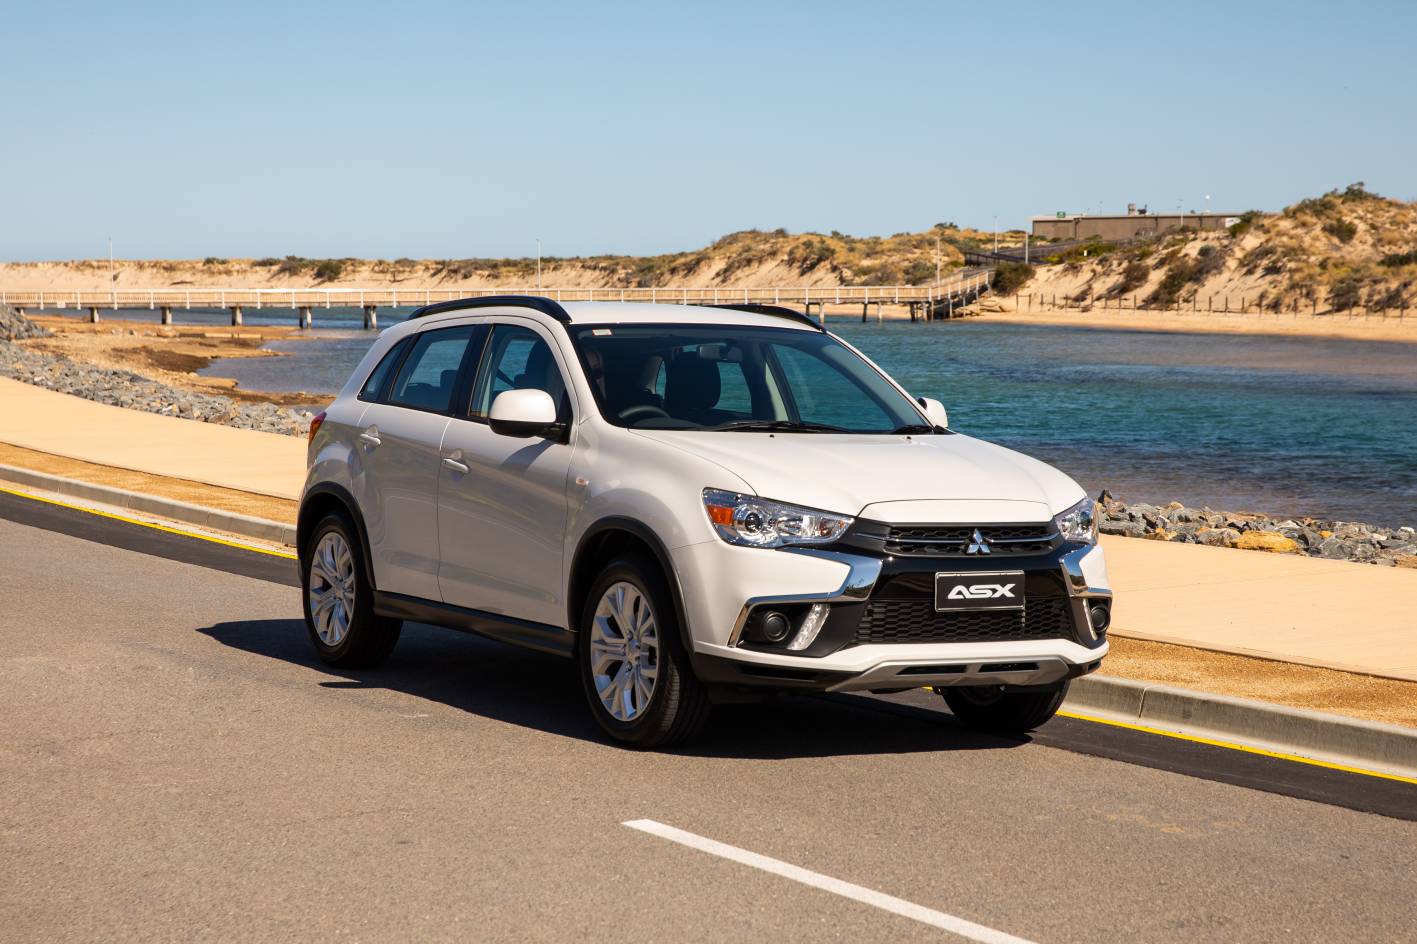 2019 Mitsubishi ASX pricing and specification